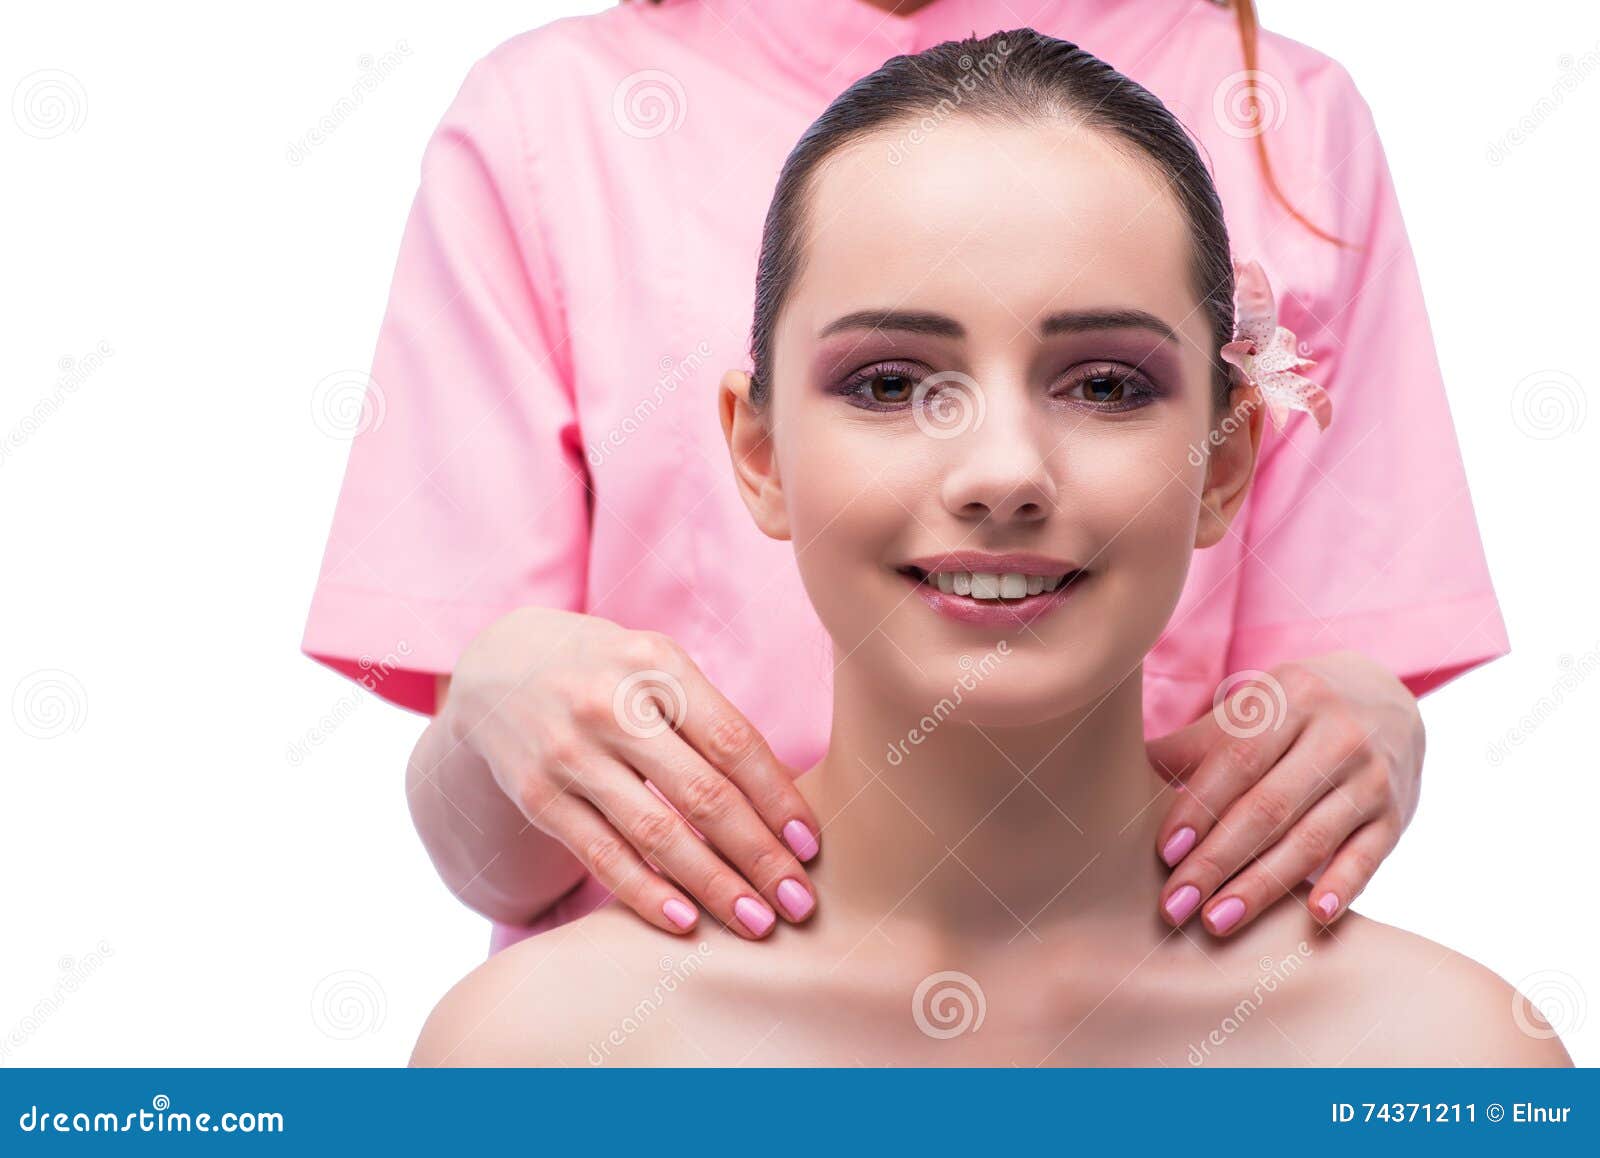 The Beautiful Young Woman During Face Massage Session Stock Image Image Of Health Healthcare